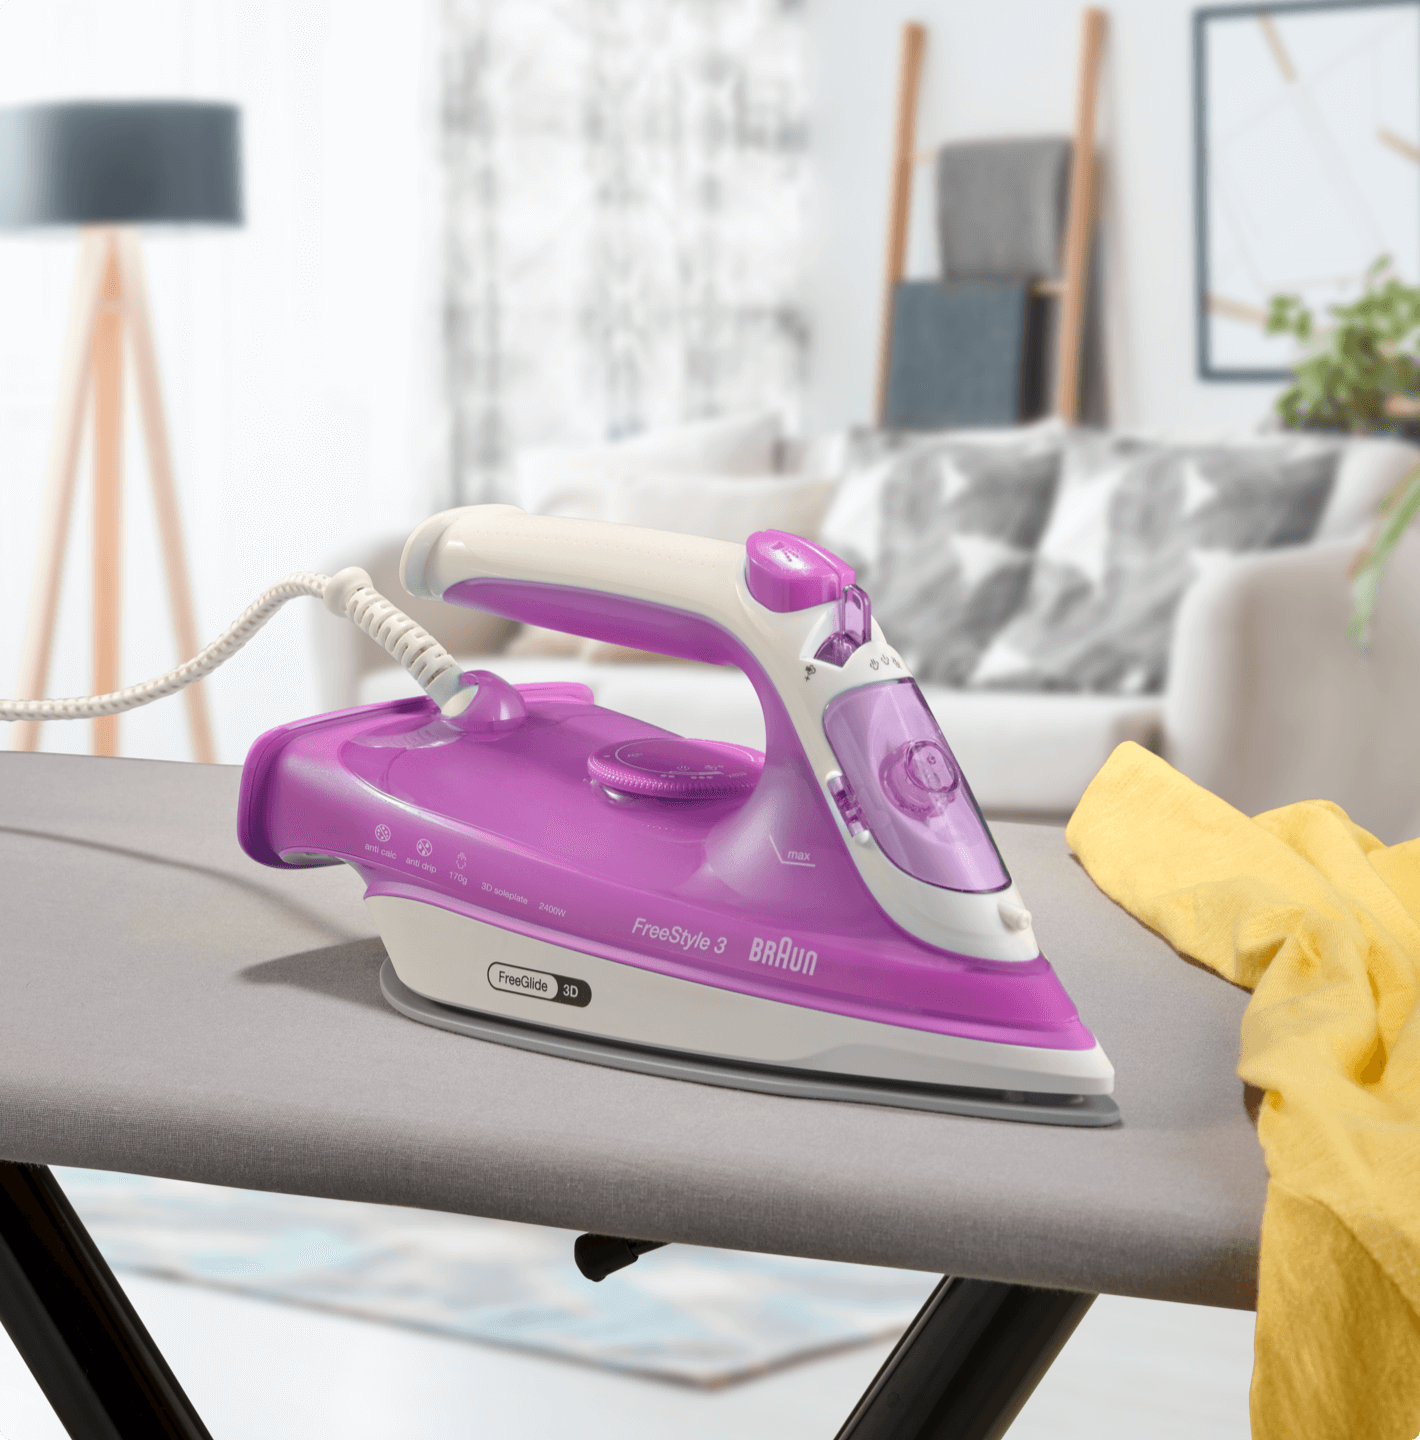 Braun FreeStyle 3 steam iron with Auto-off function